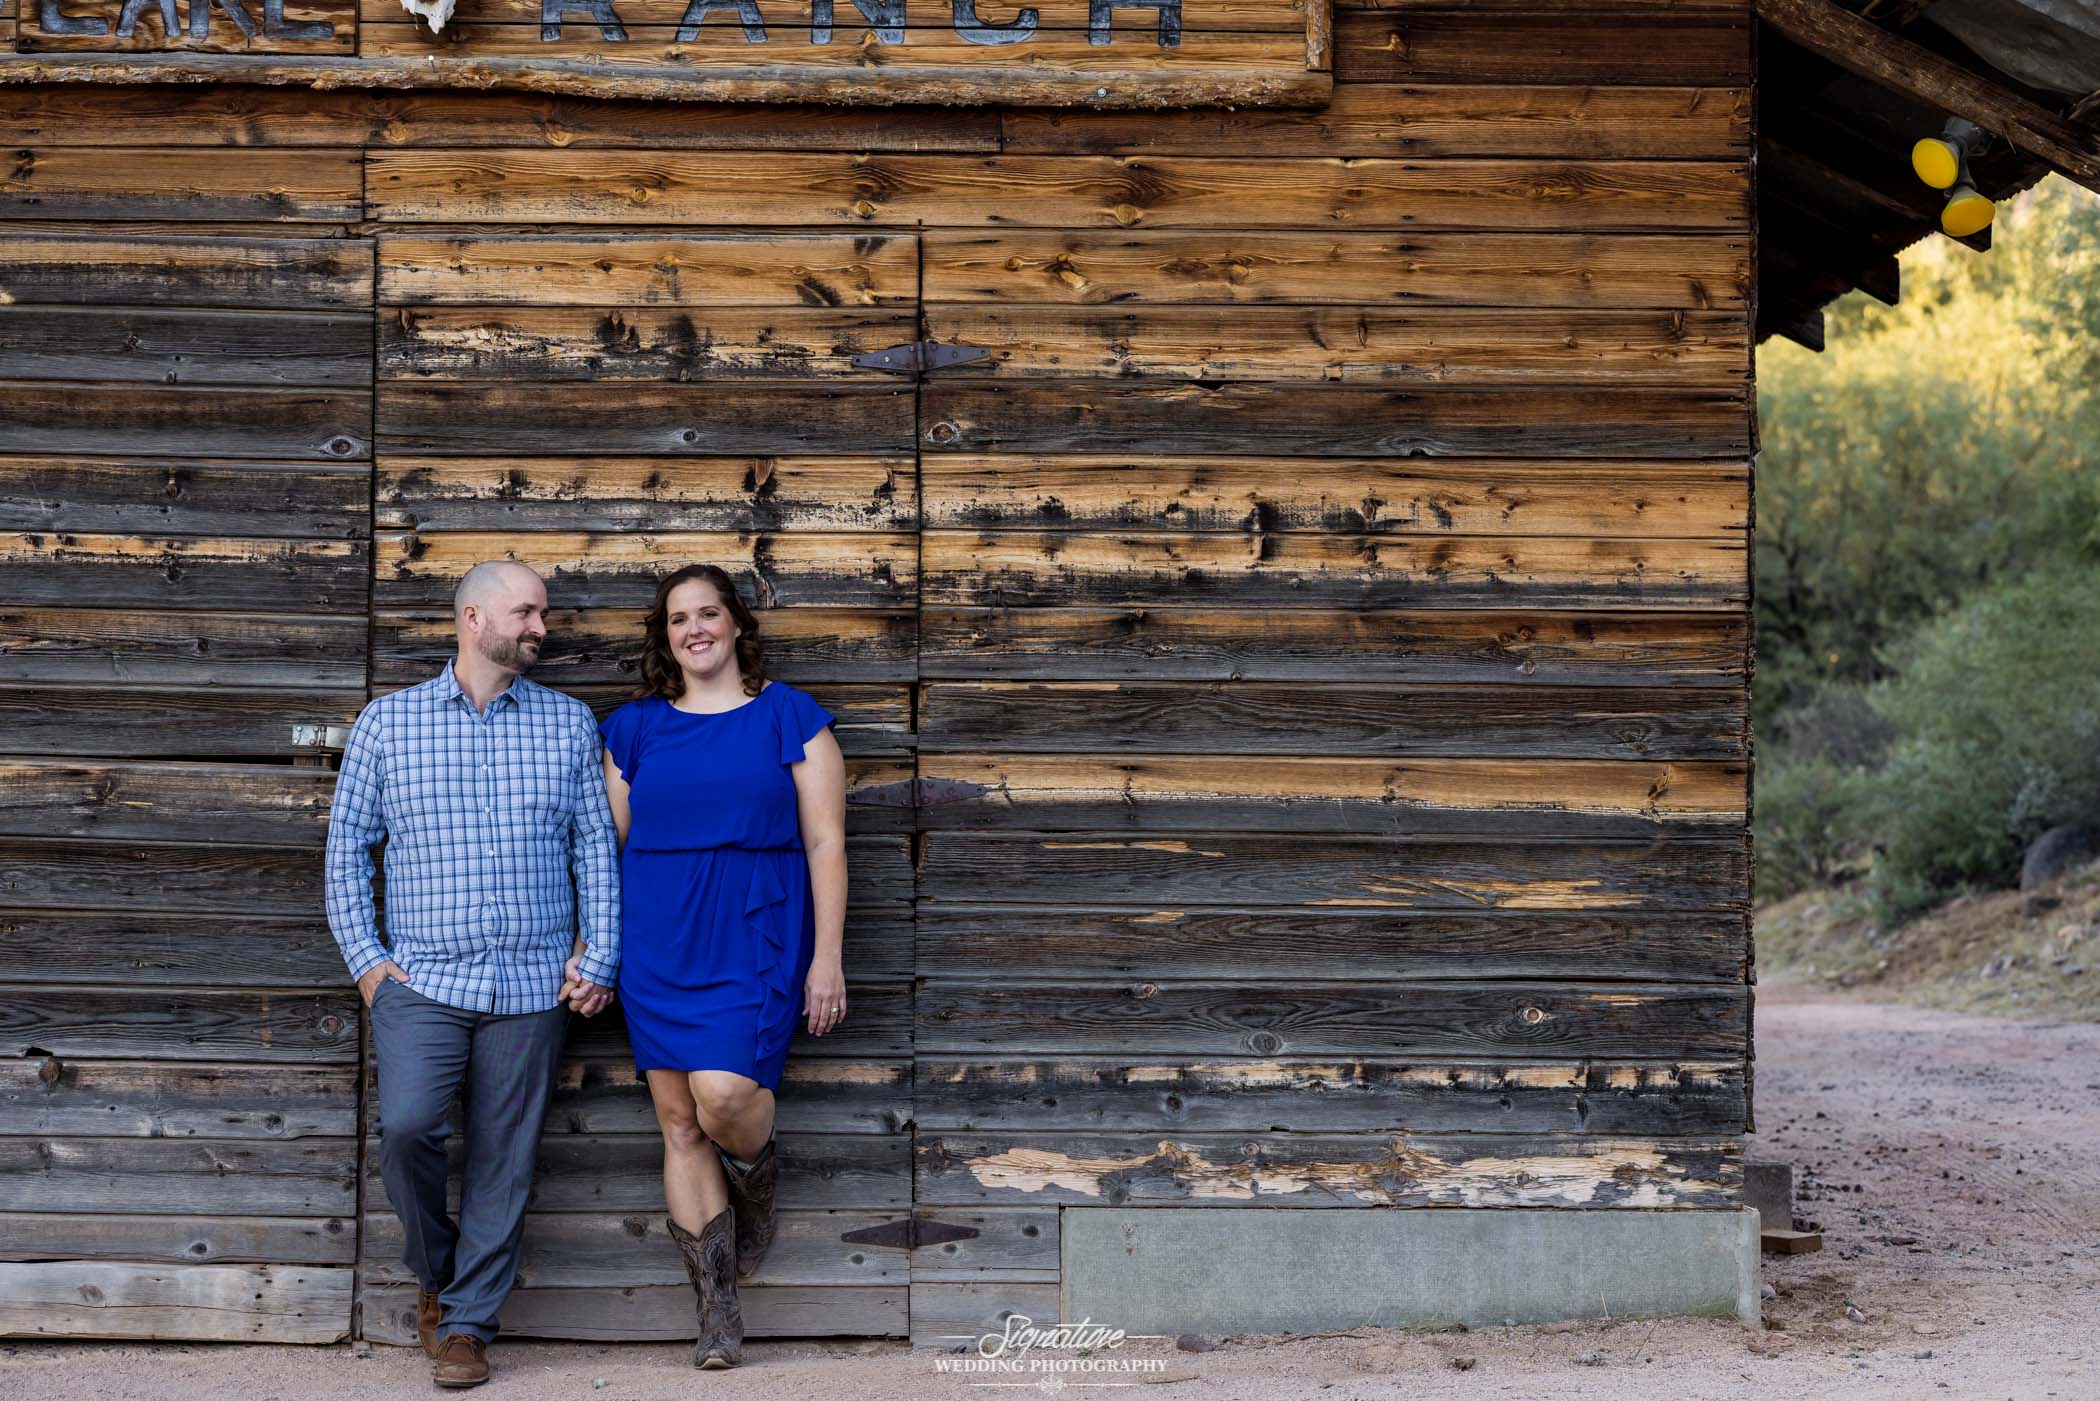 Couple holding hands smiling against wooden barn